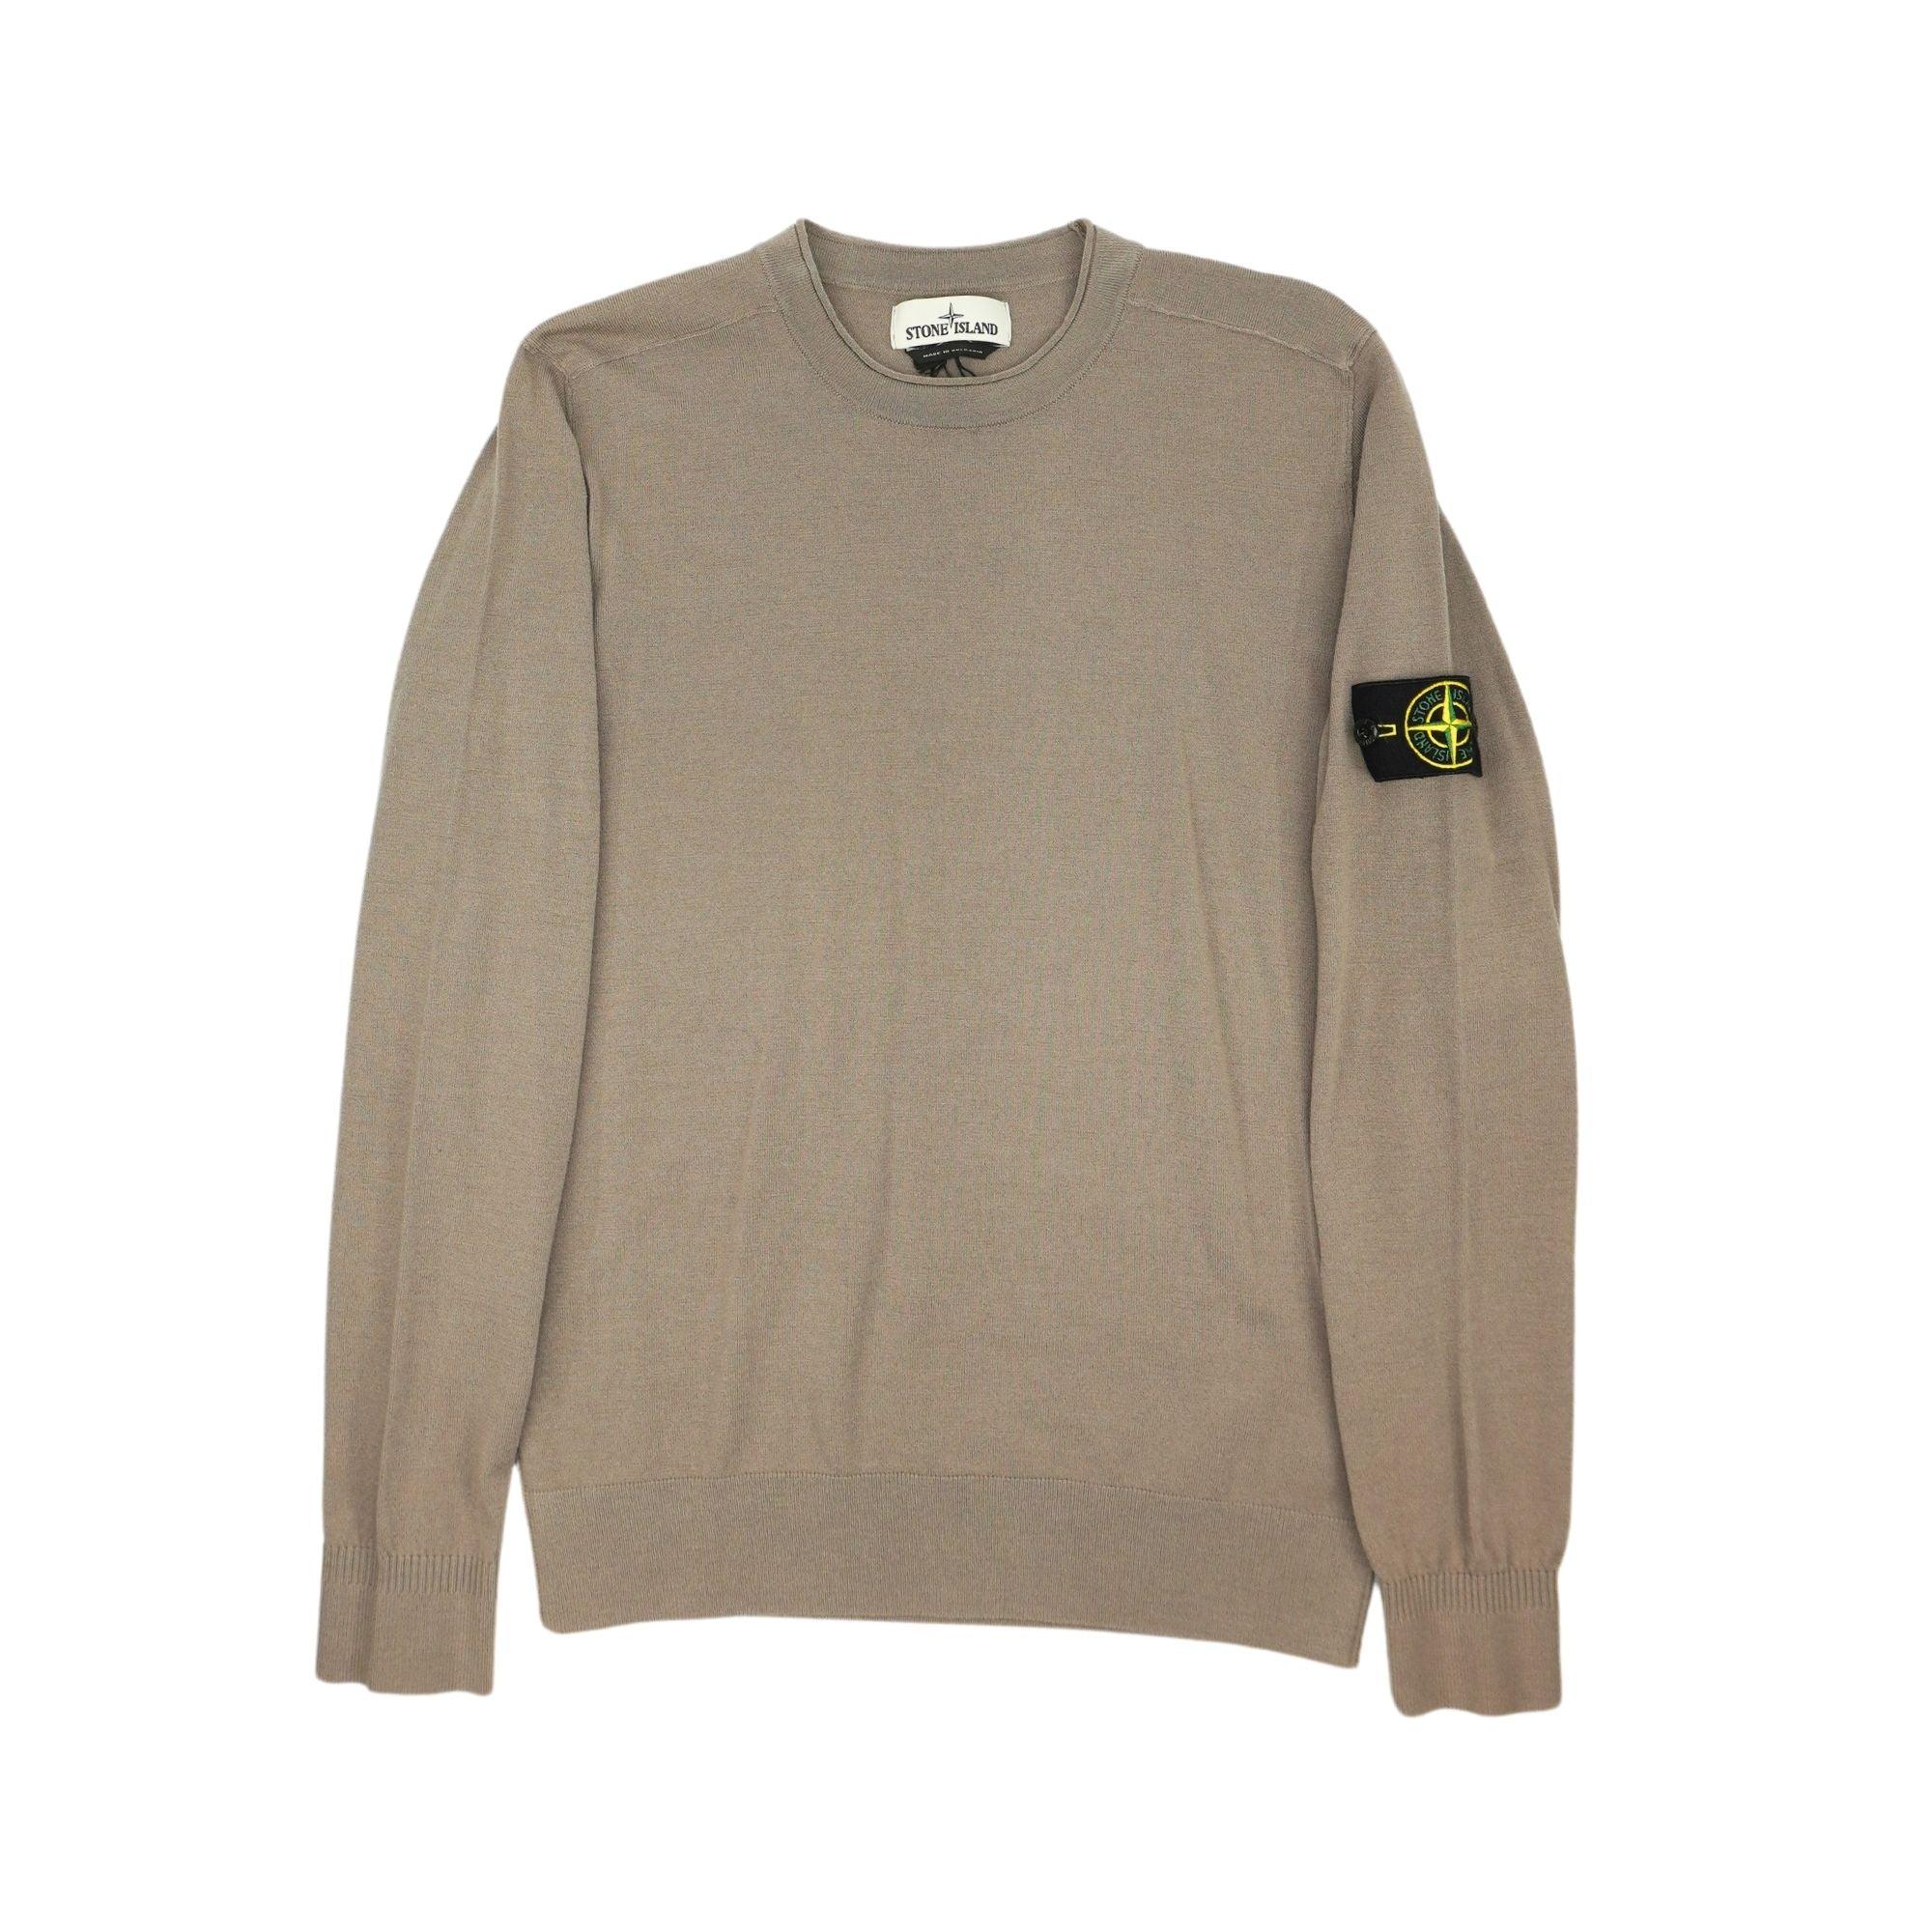 Stone Island Sweater - Men's L - Fashionably Yours